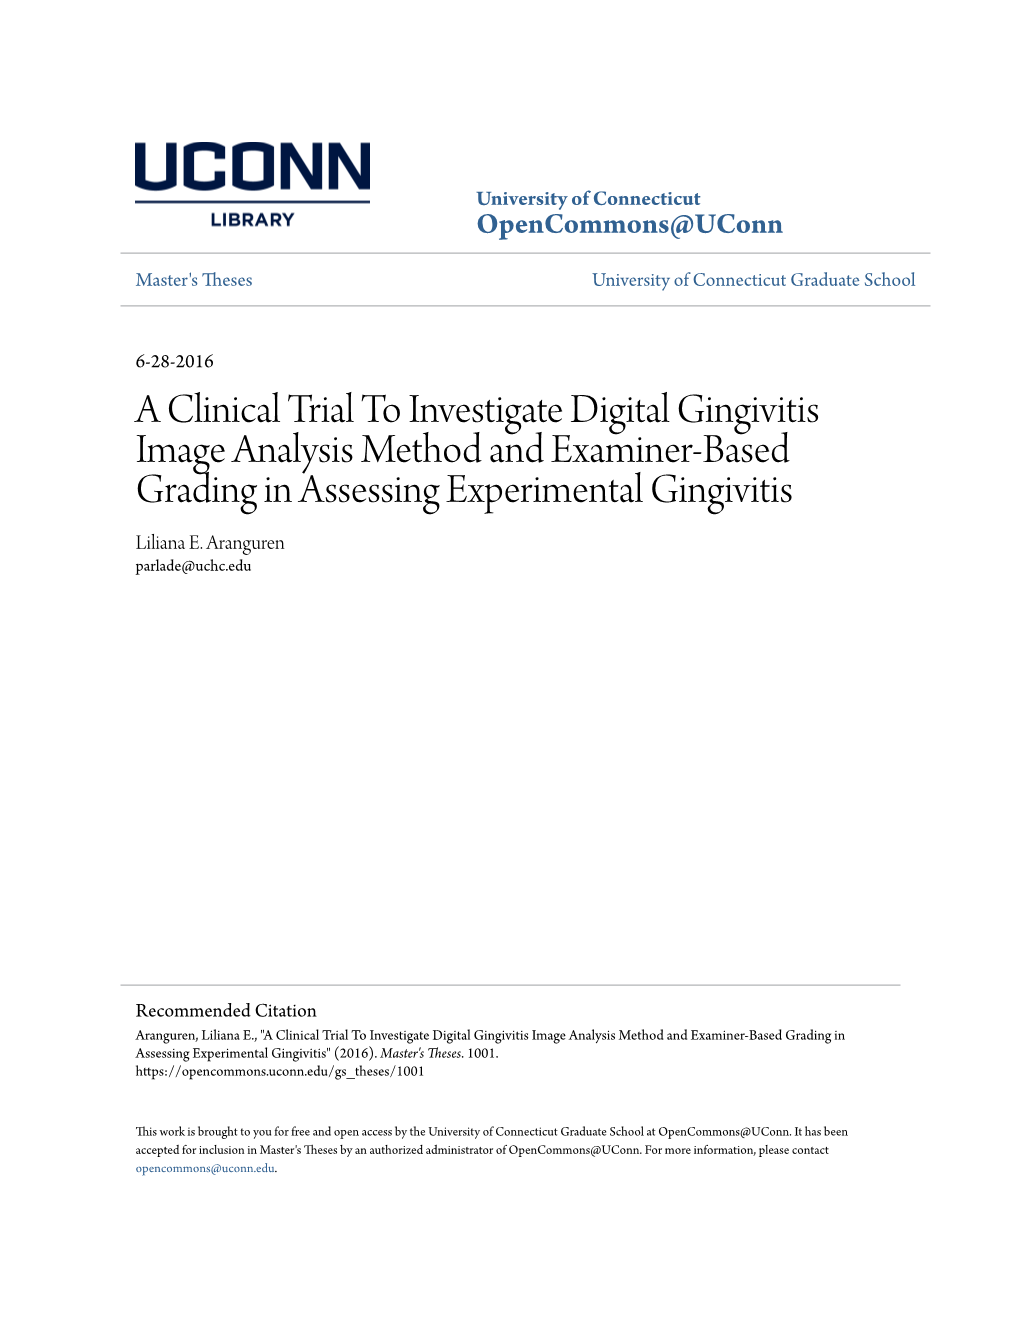 A Clinical Trial to Investigate Digital Gingivitis Image Analysis Method and Examiner-Based Grading in Assessing Experimental Gingivitis Liliana E